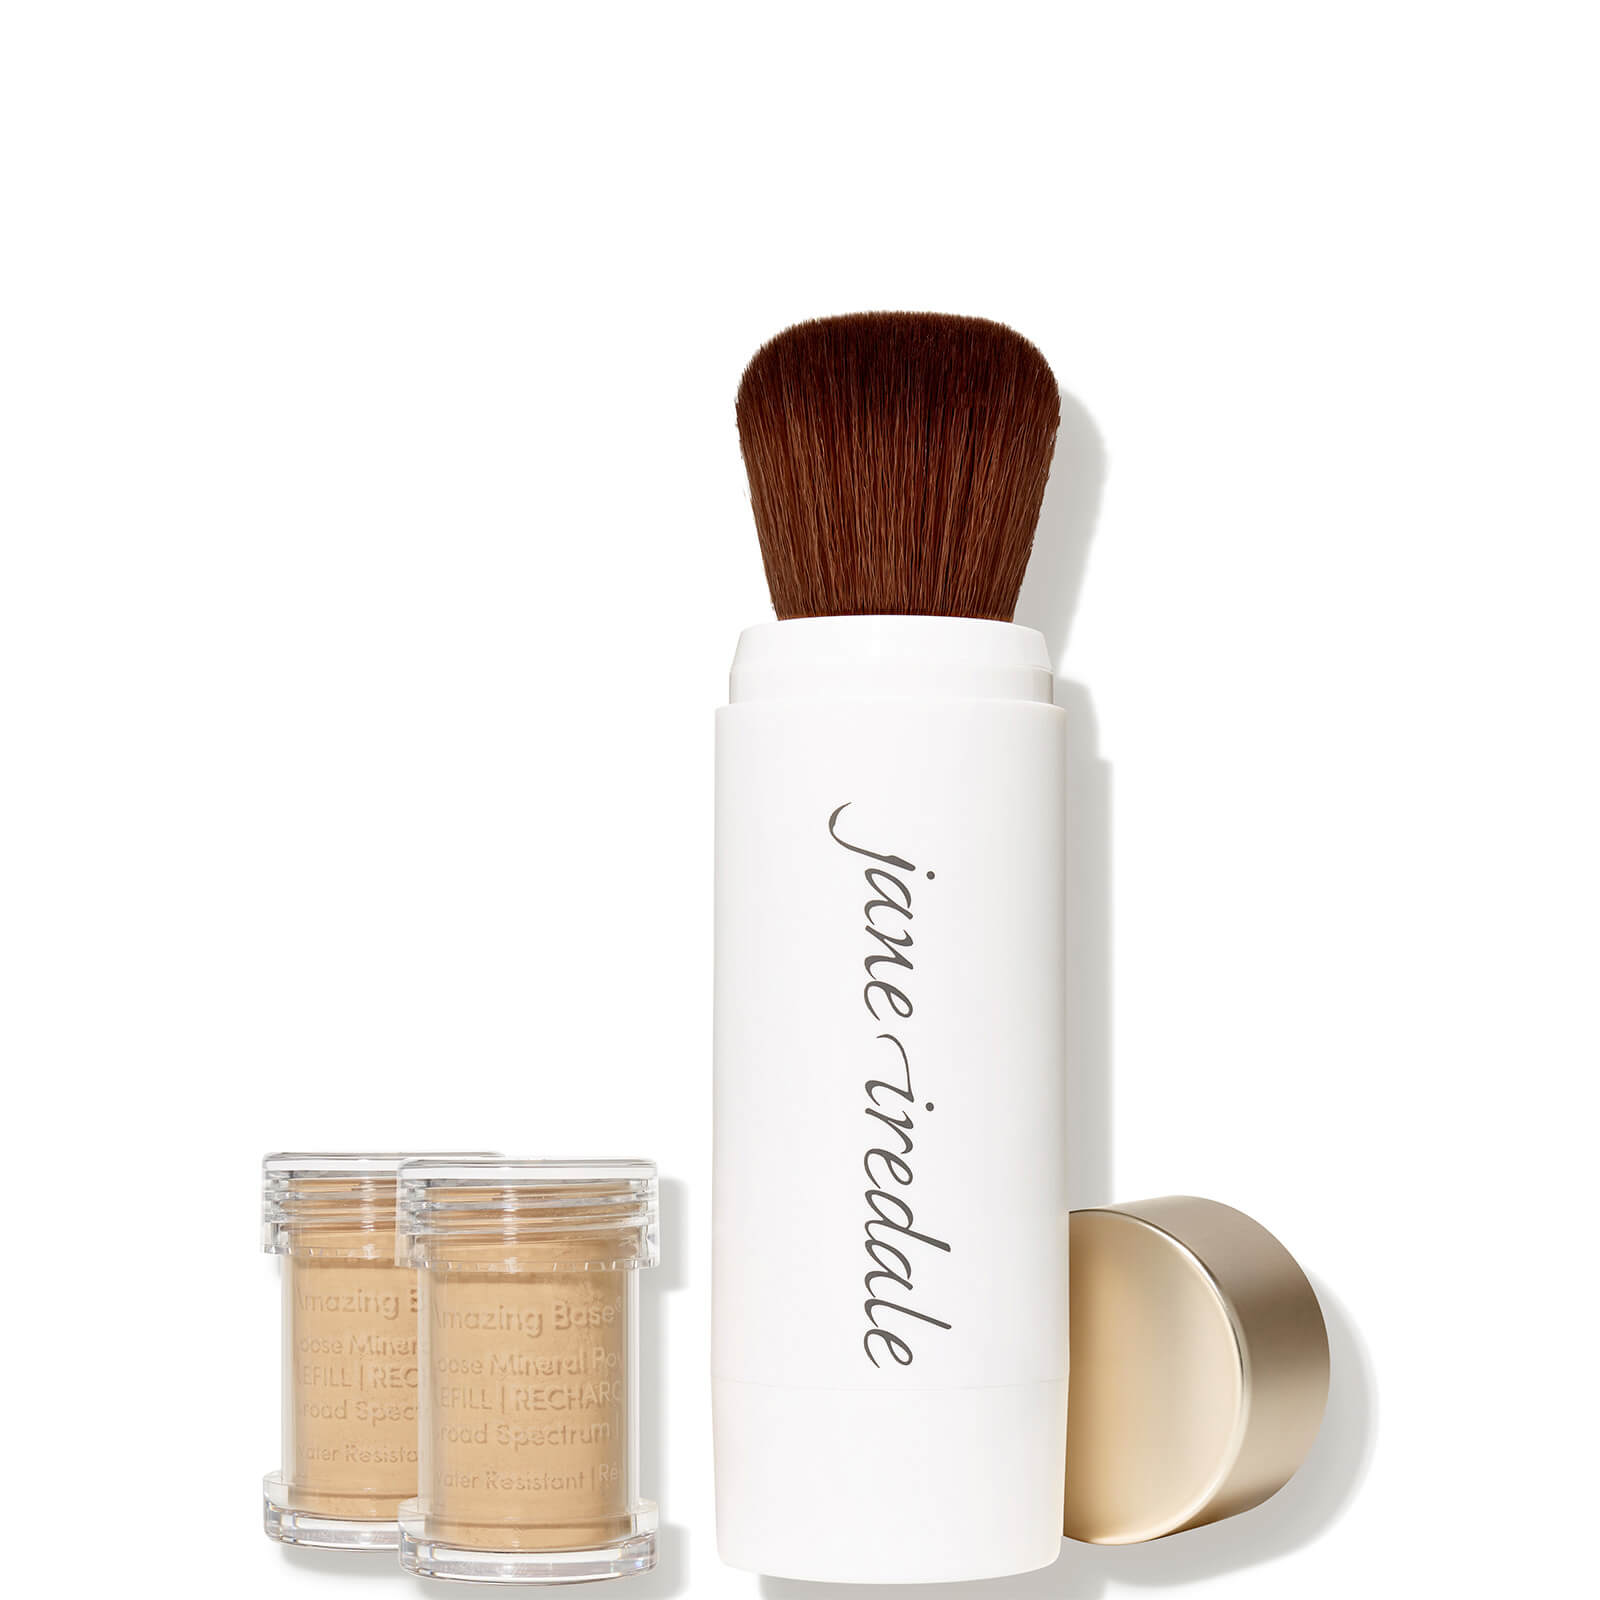 Jane Iredale Amazing Base Refillable Brush (various Shades) In Warm Sienna